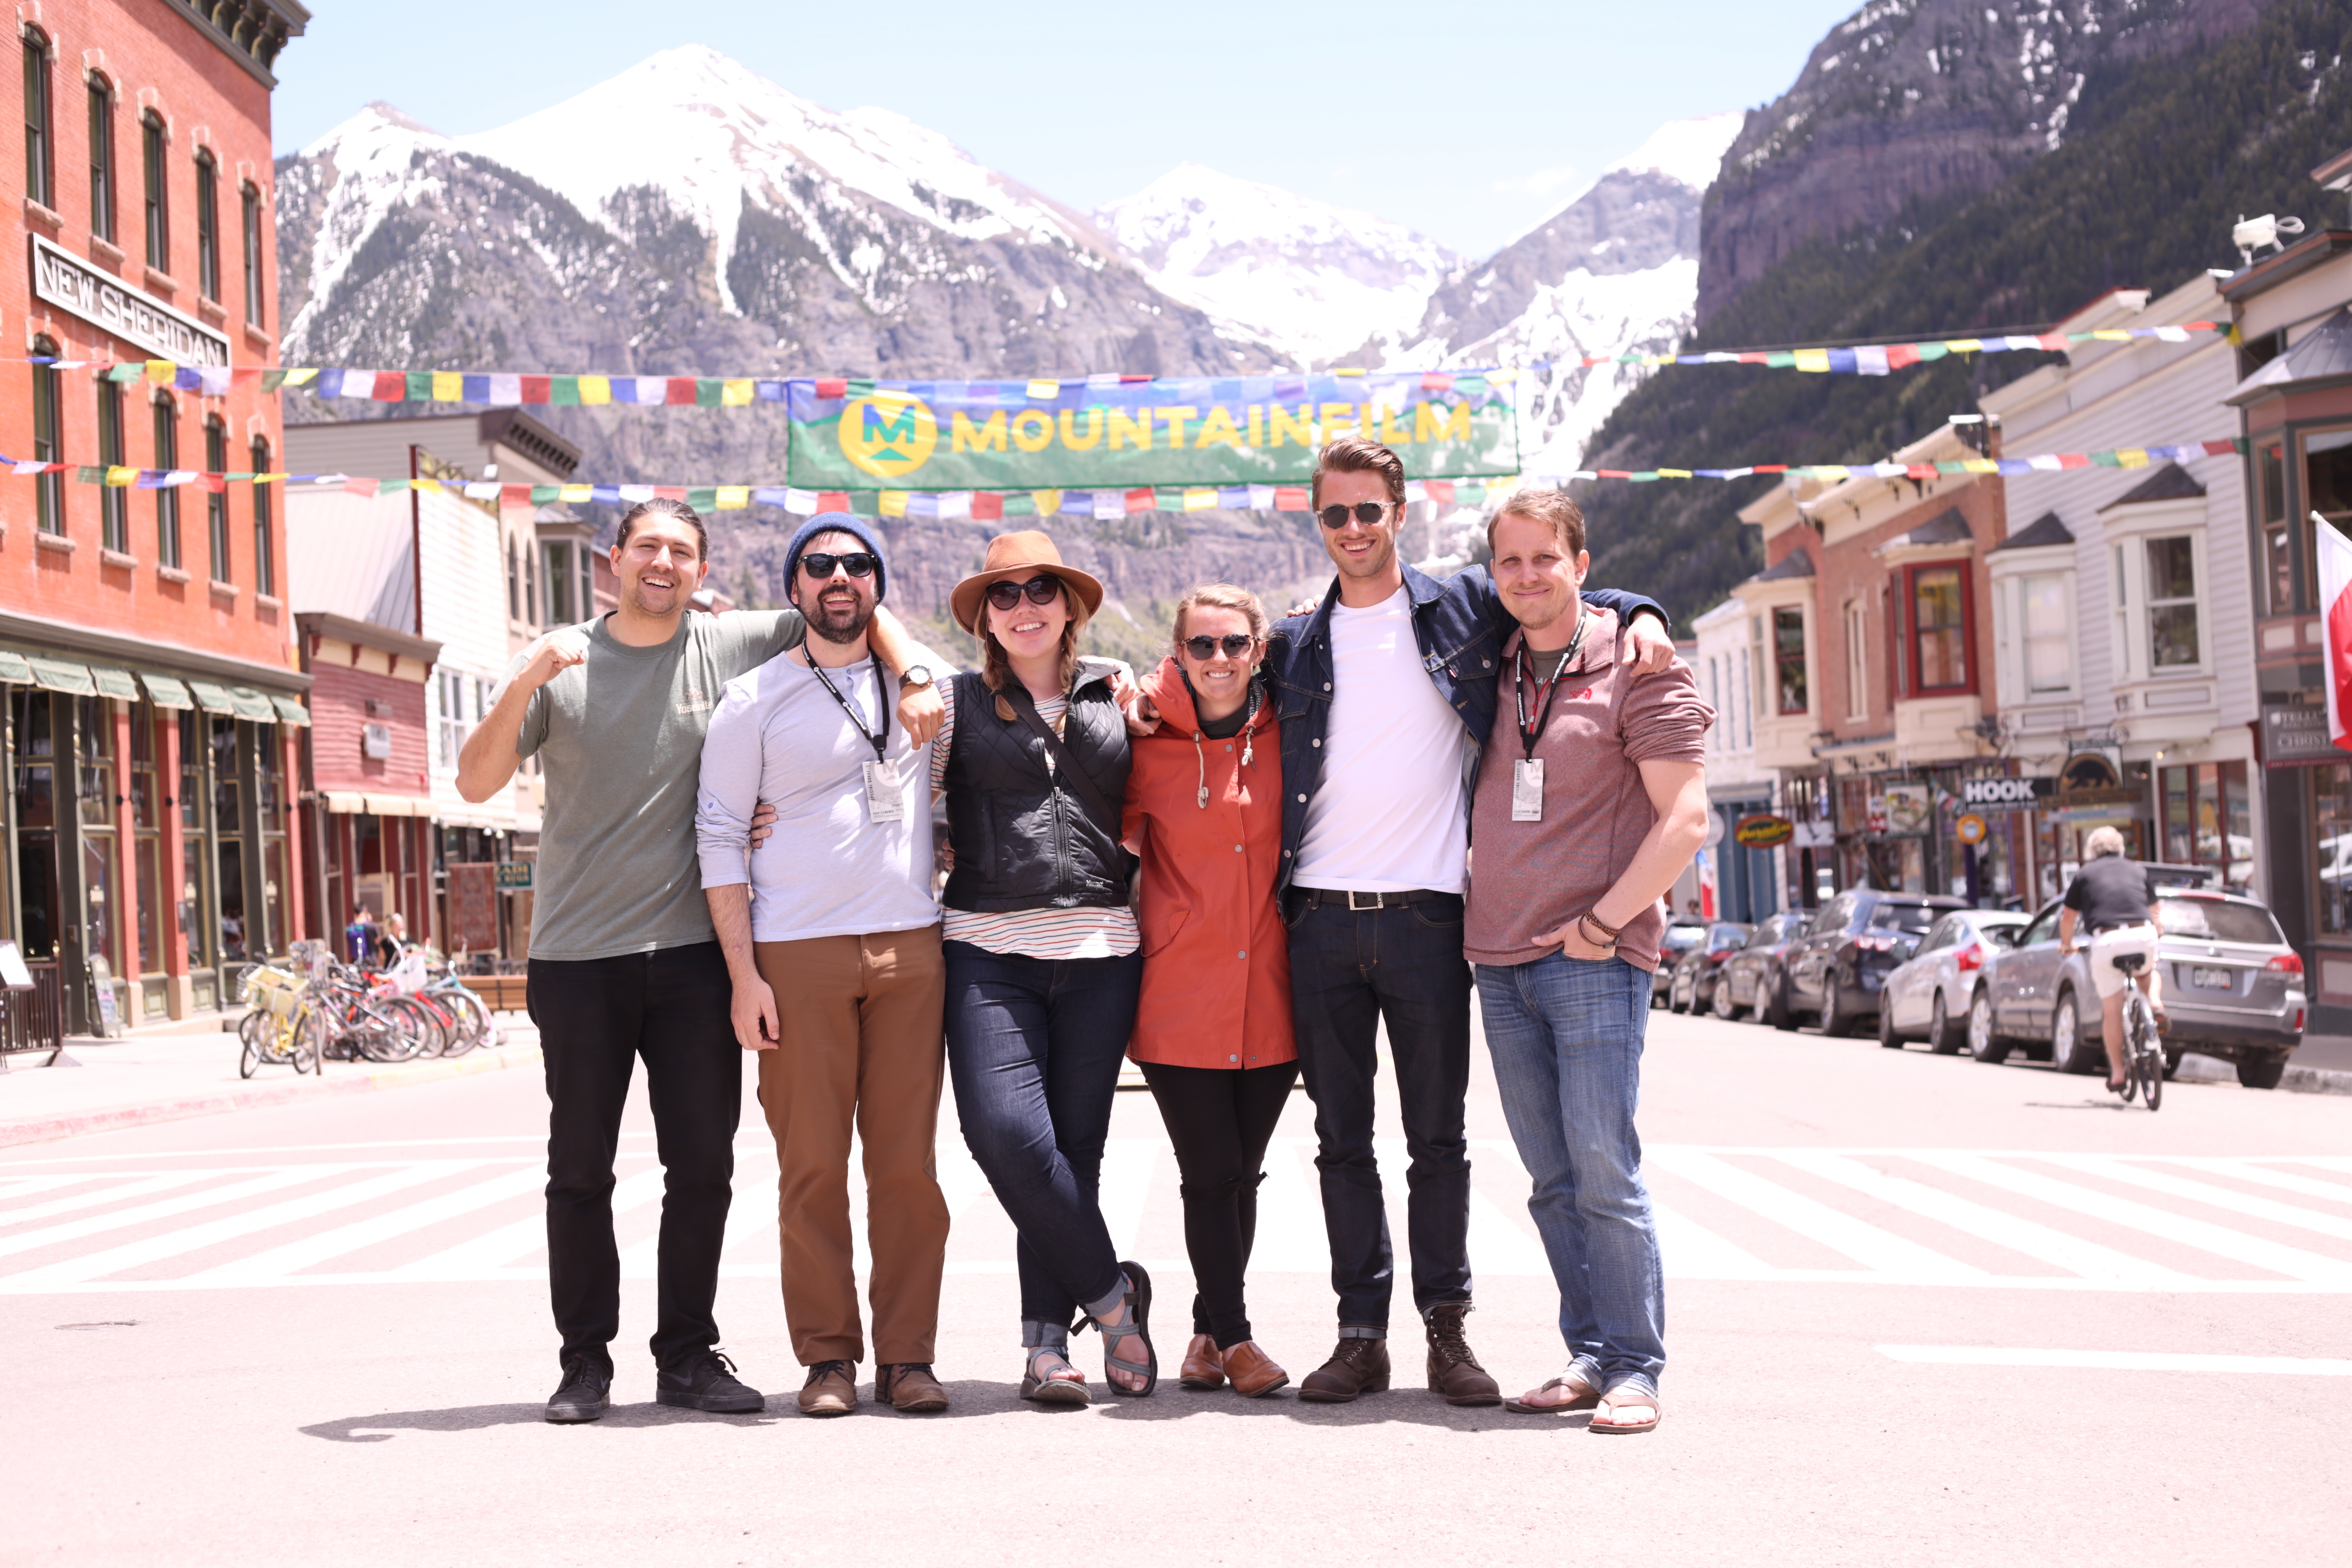 Tyler Dunning with the Mountainfilm crew